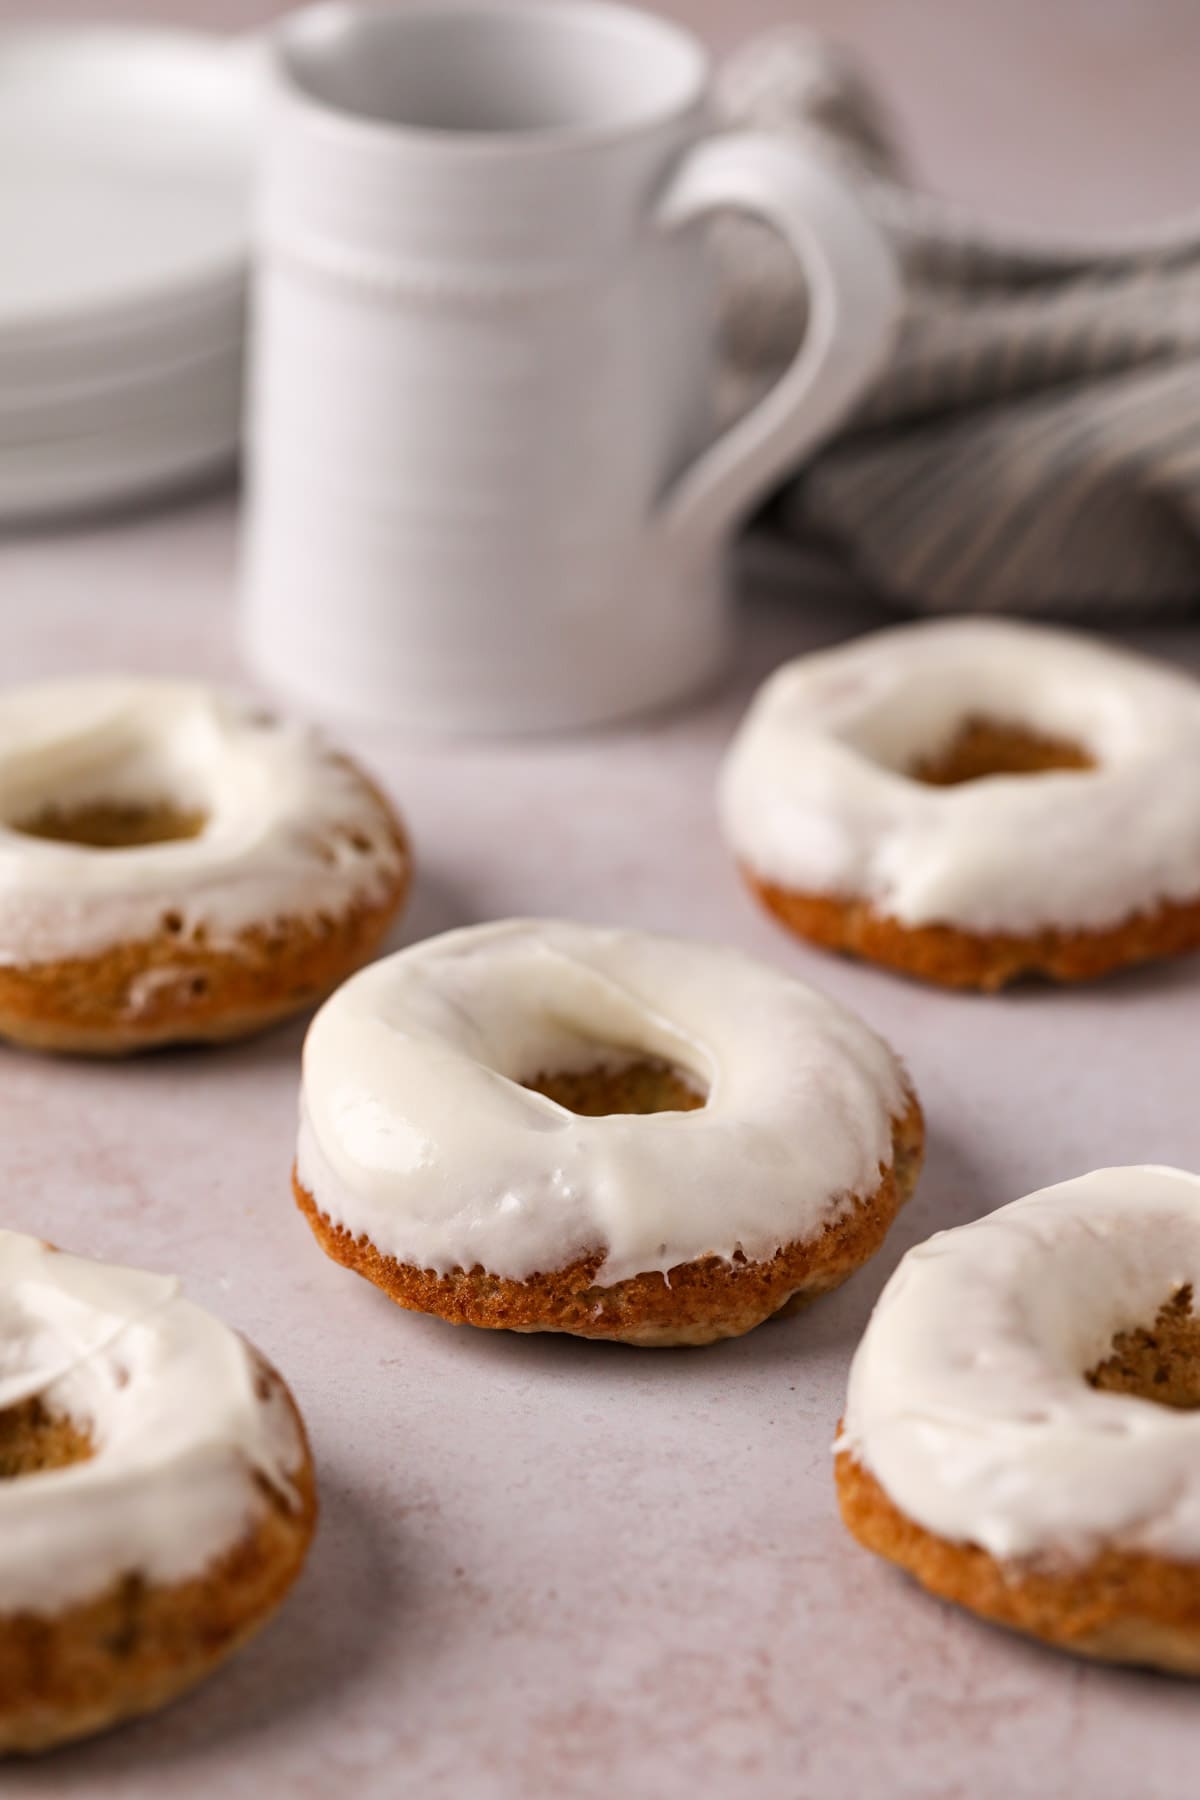 Baked banana donuts with cream cheese frosting on a flat surface.